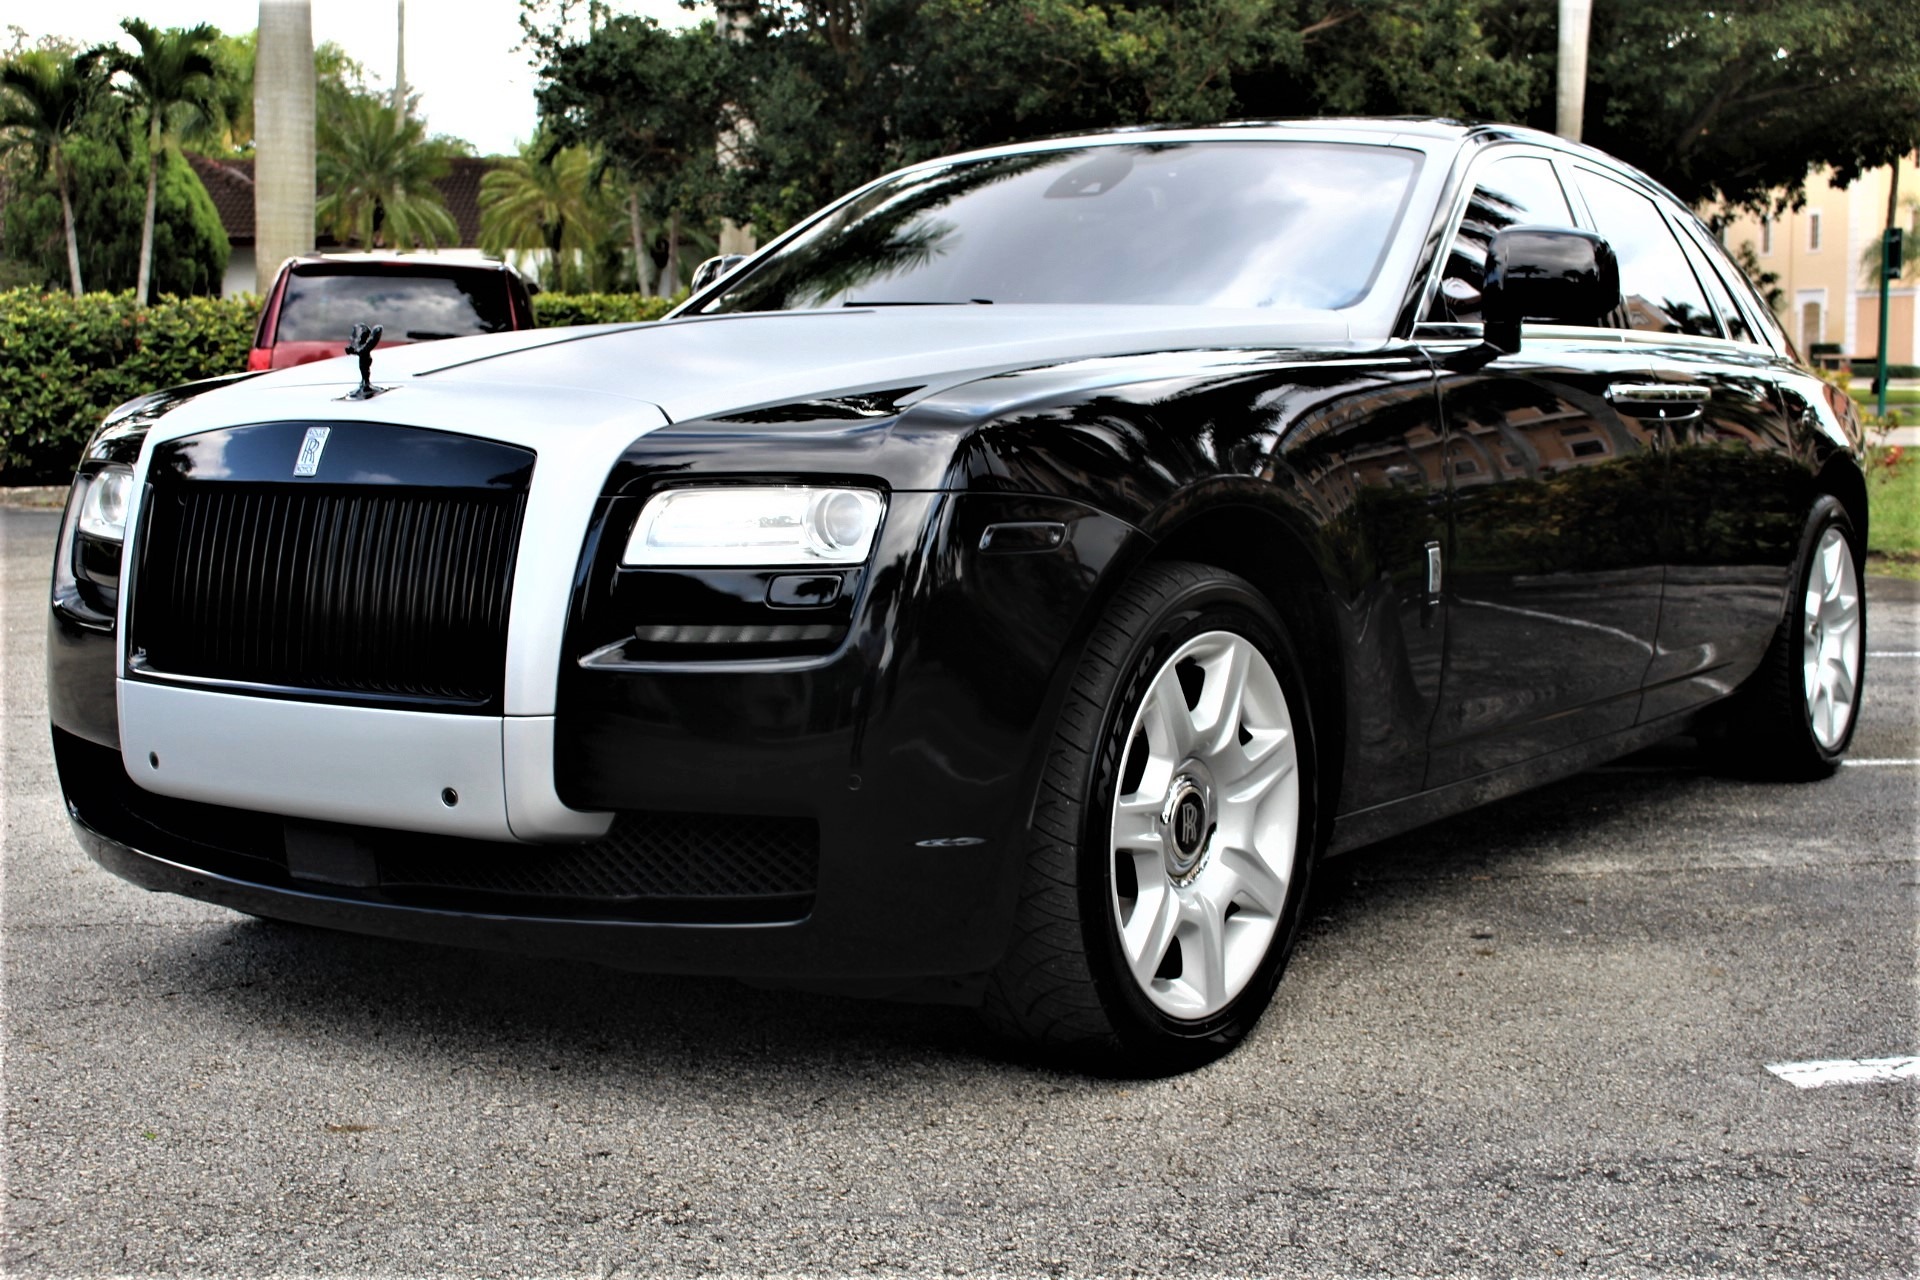 Used 2011 Rolls-Royce Ghost for sale Sold at The Gables Sports Cars in Miami FL 33146 2